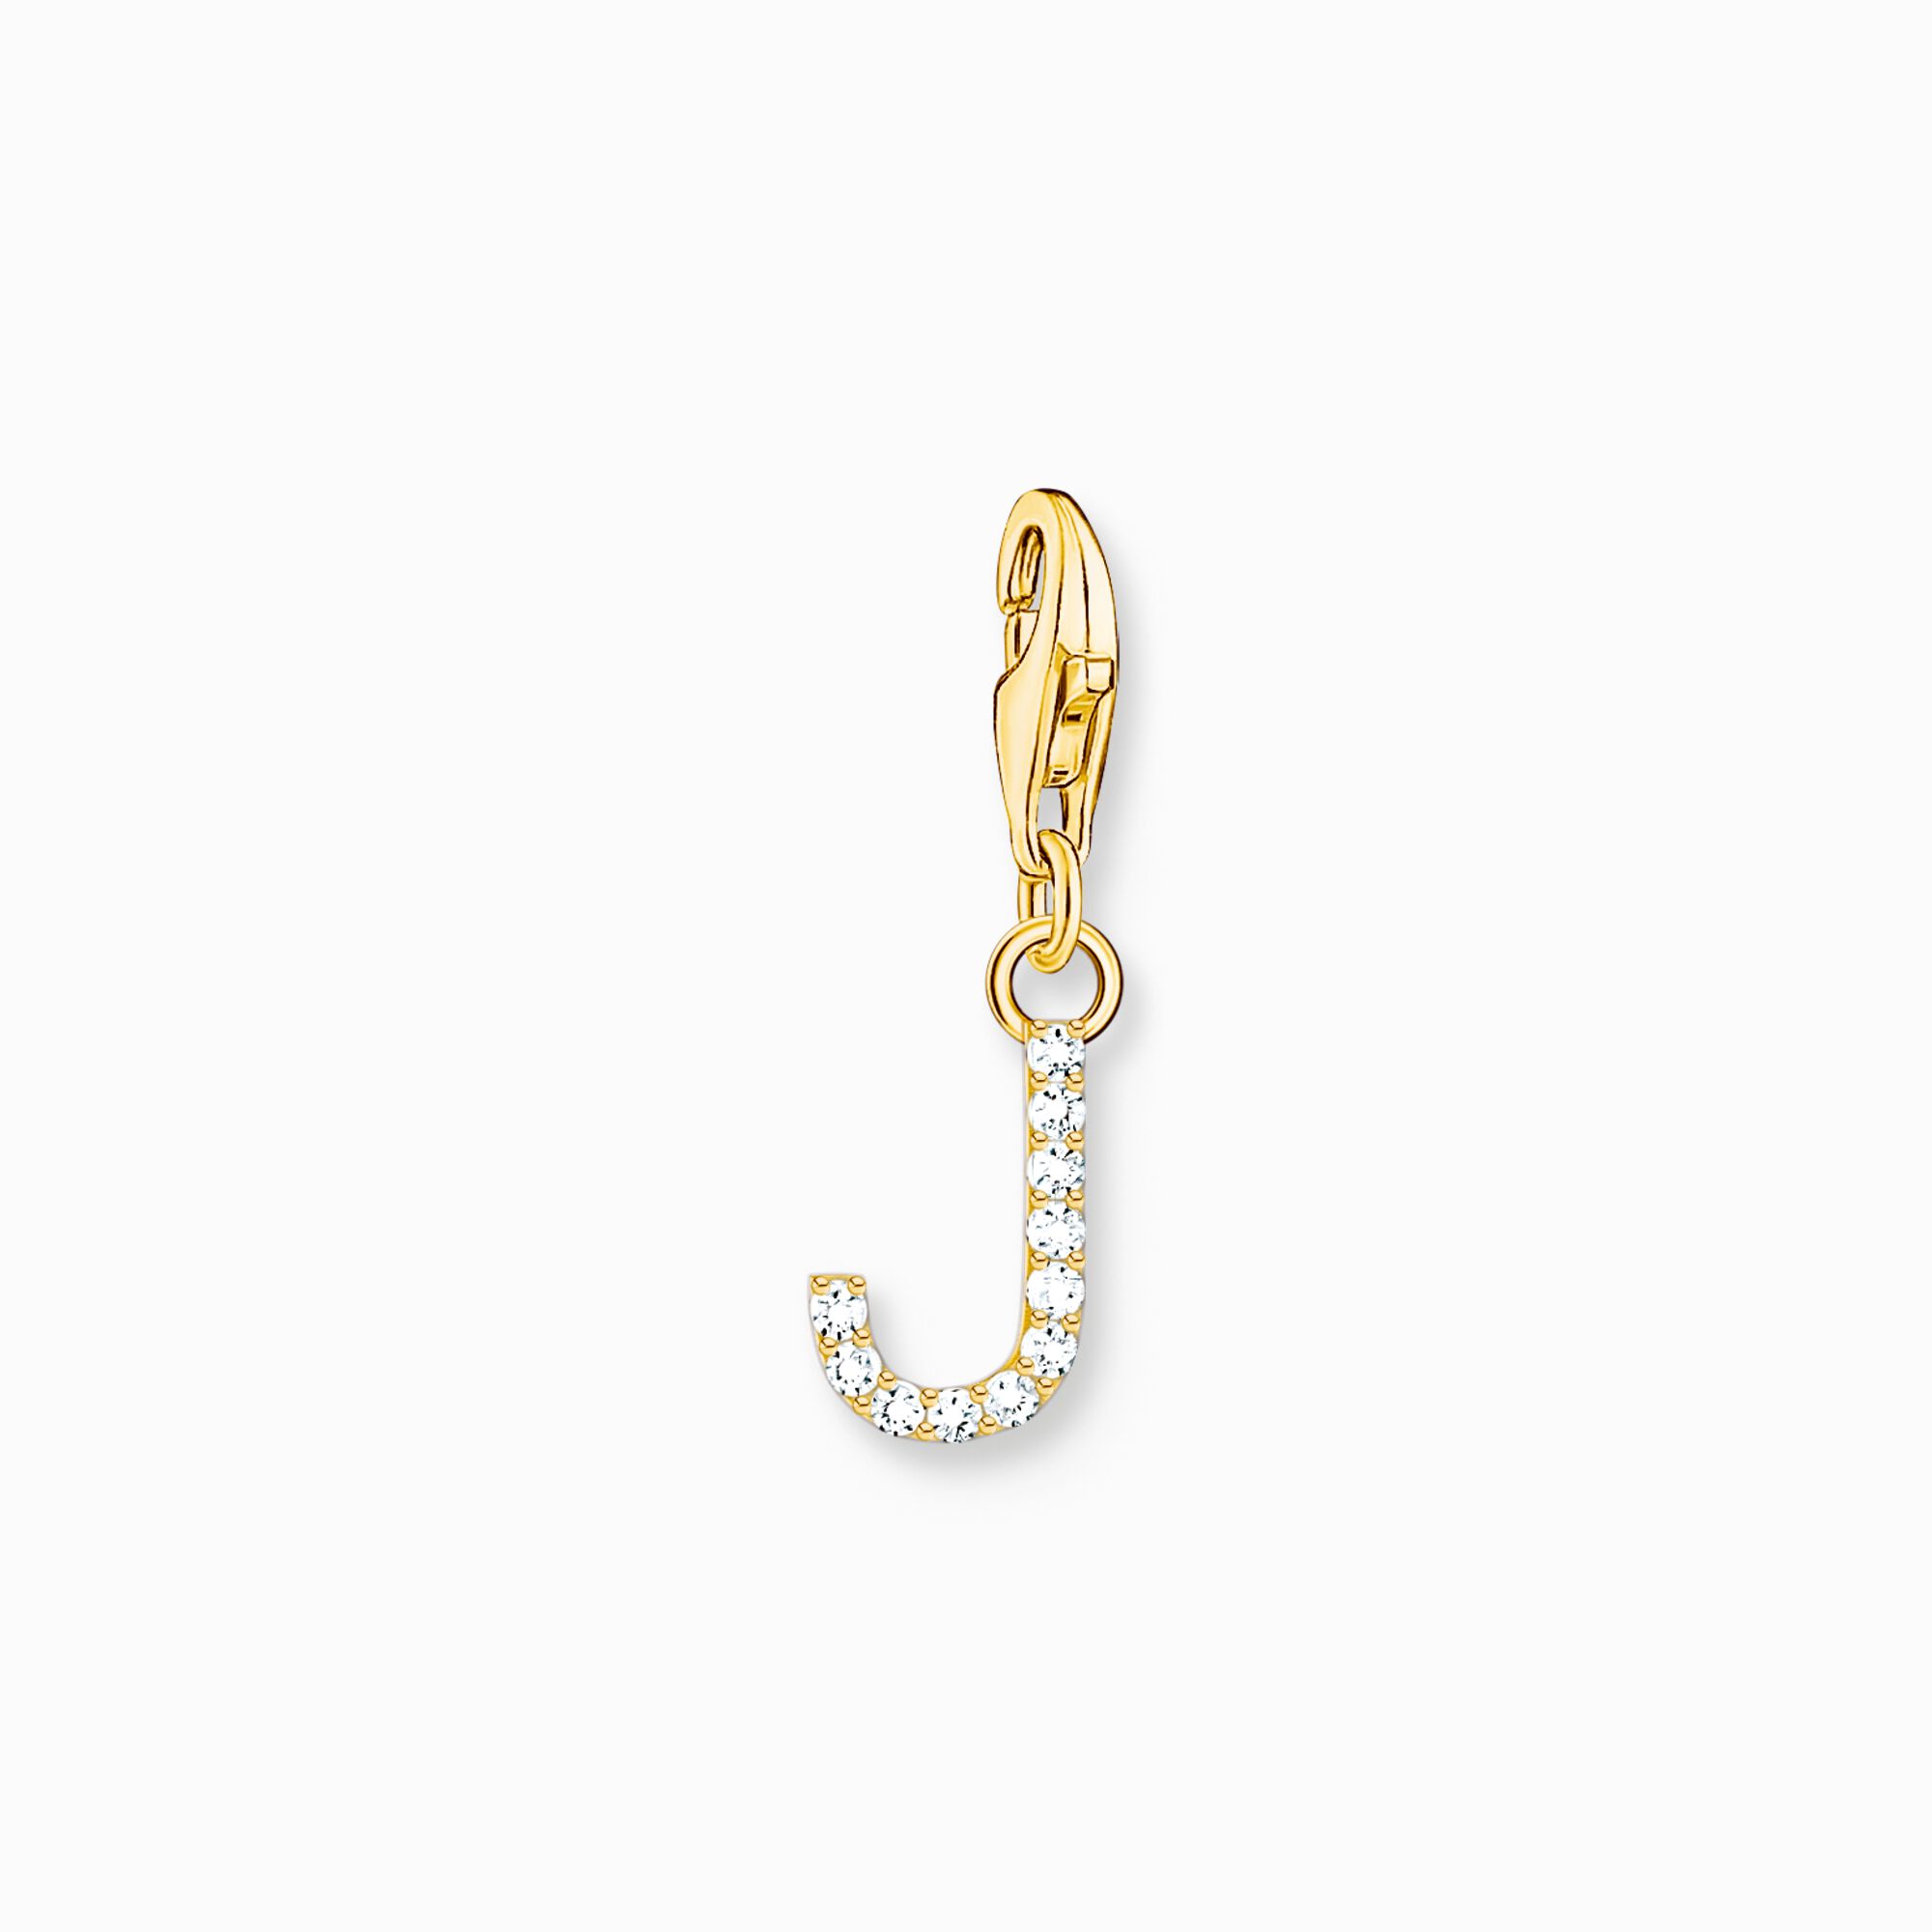 Charm pendant letter J with white stones gold plated from the Charm Club collection in the THOMAS SABO online store